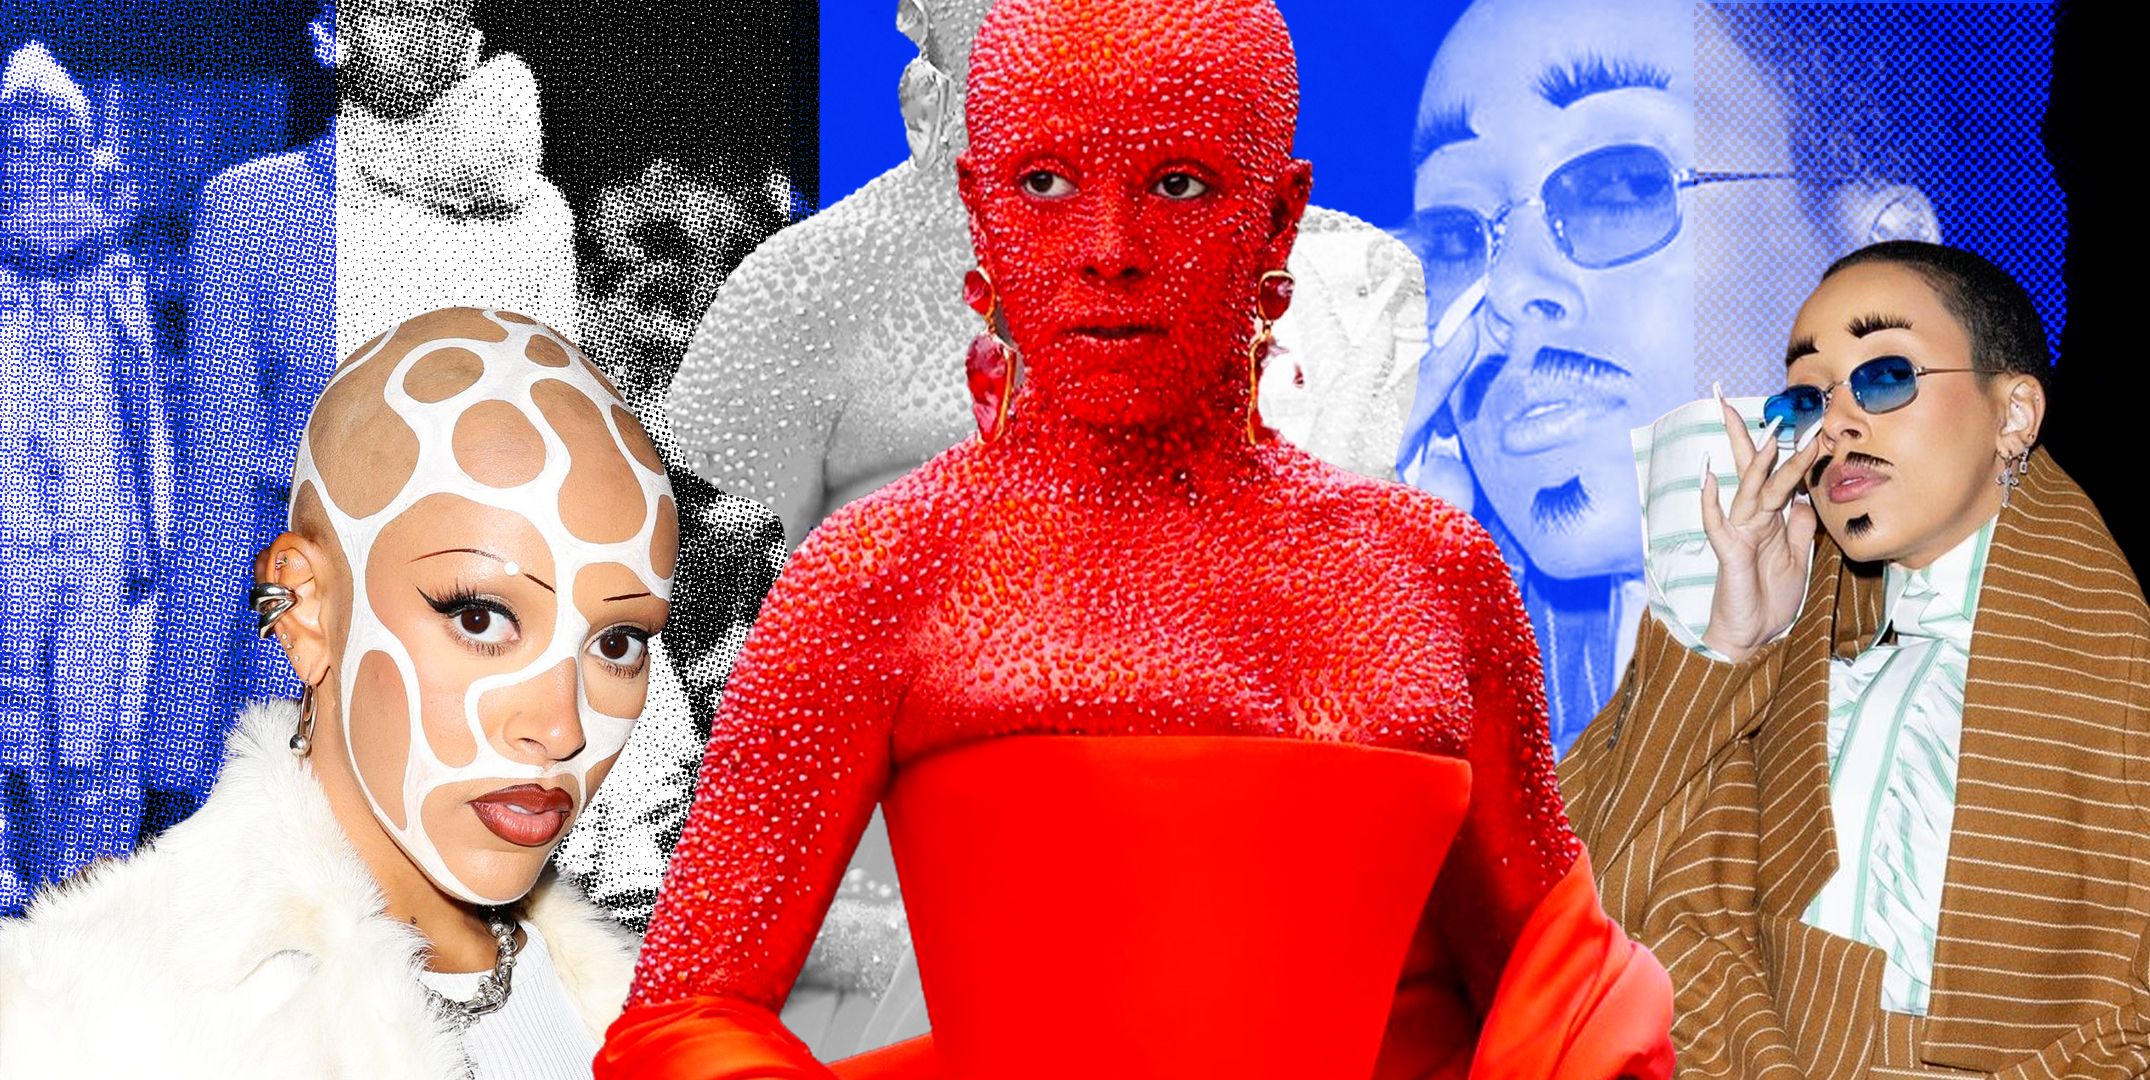 Doja Cat's Valentino see-through dress is completely transparent